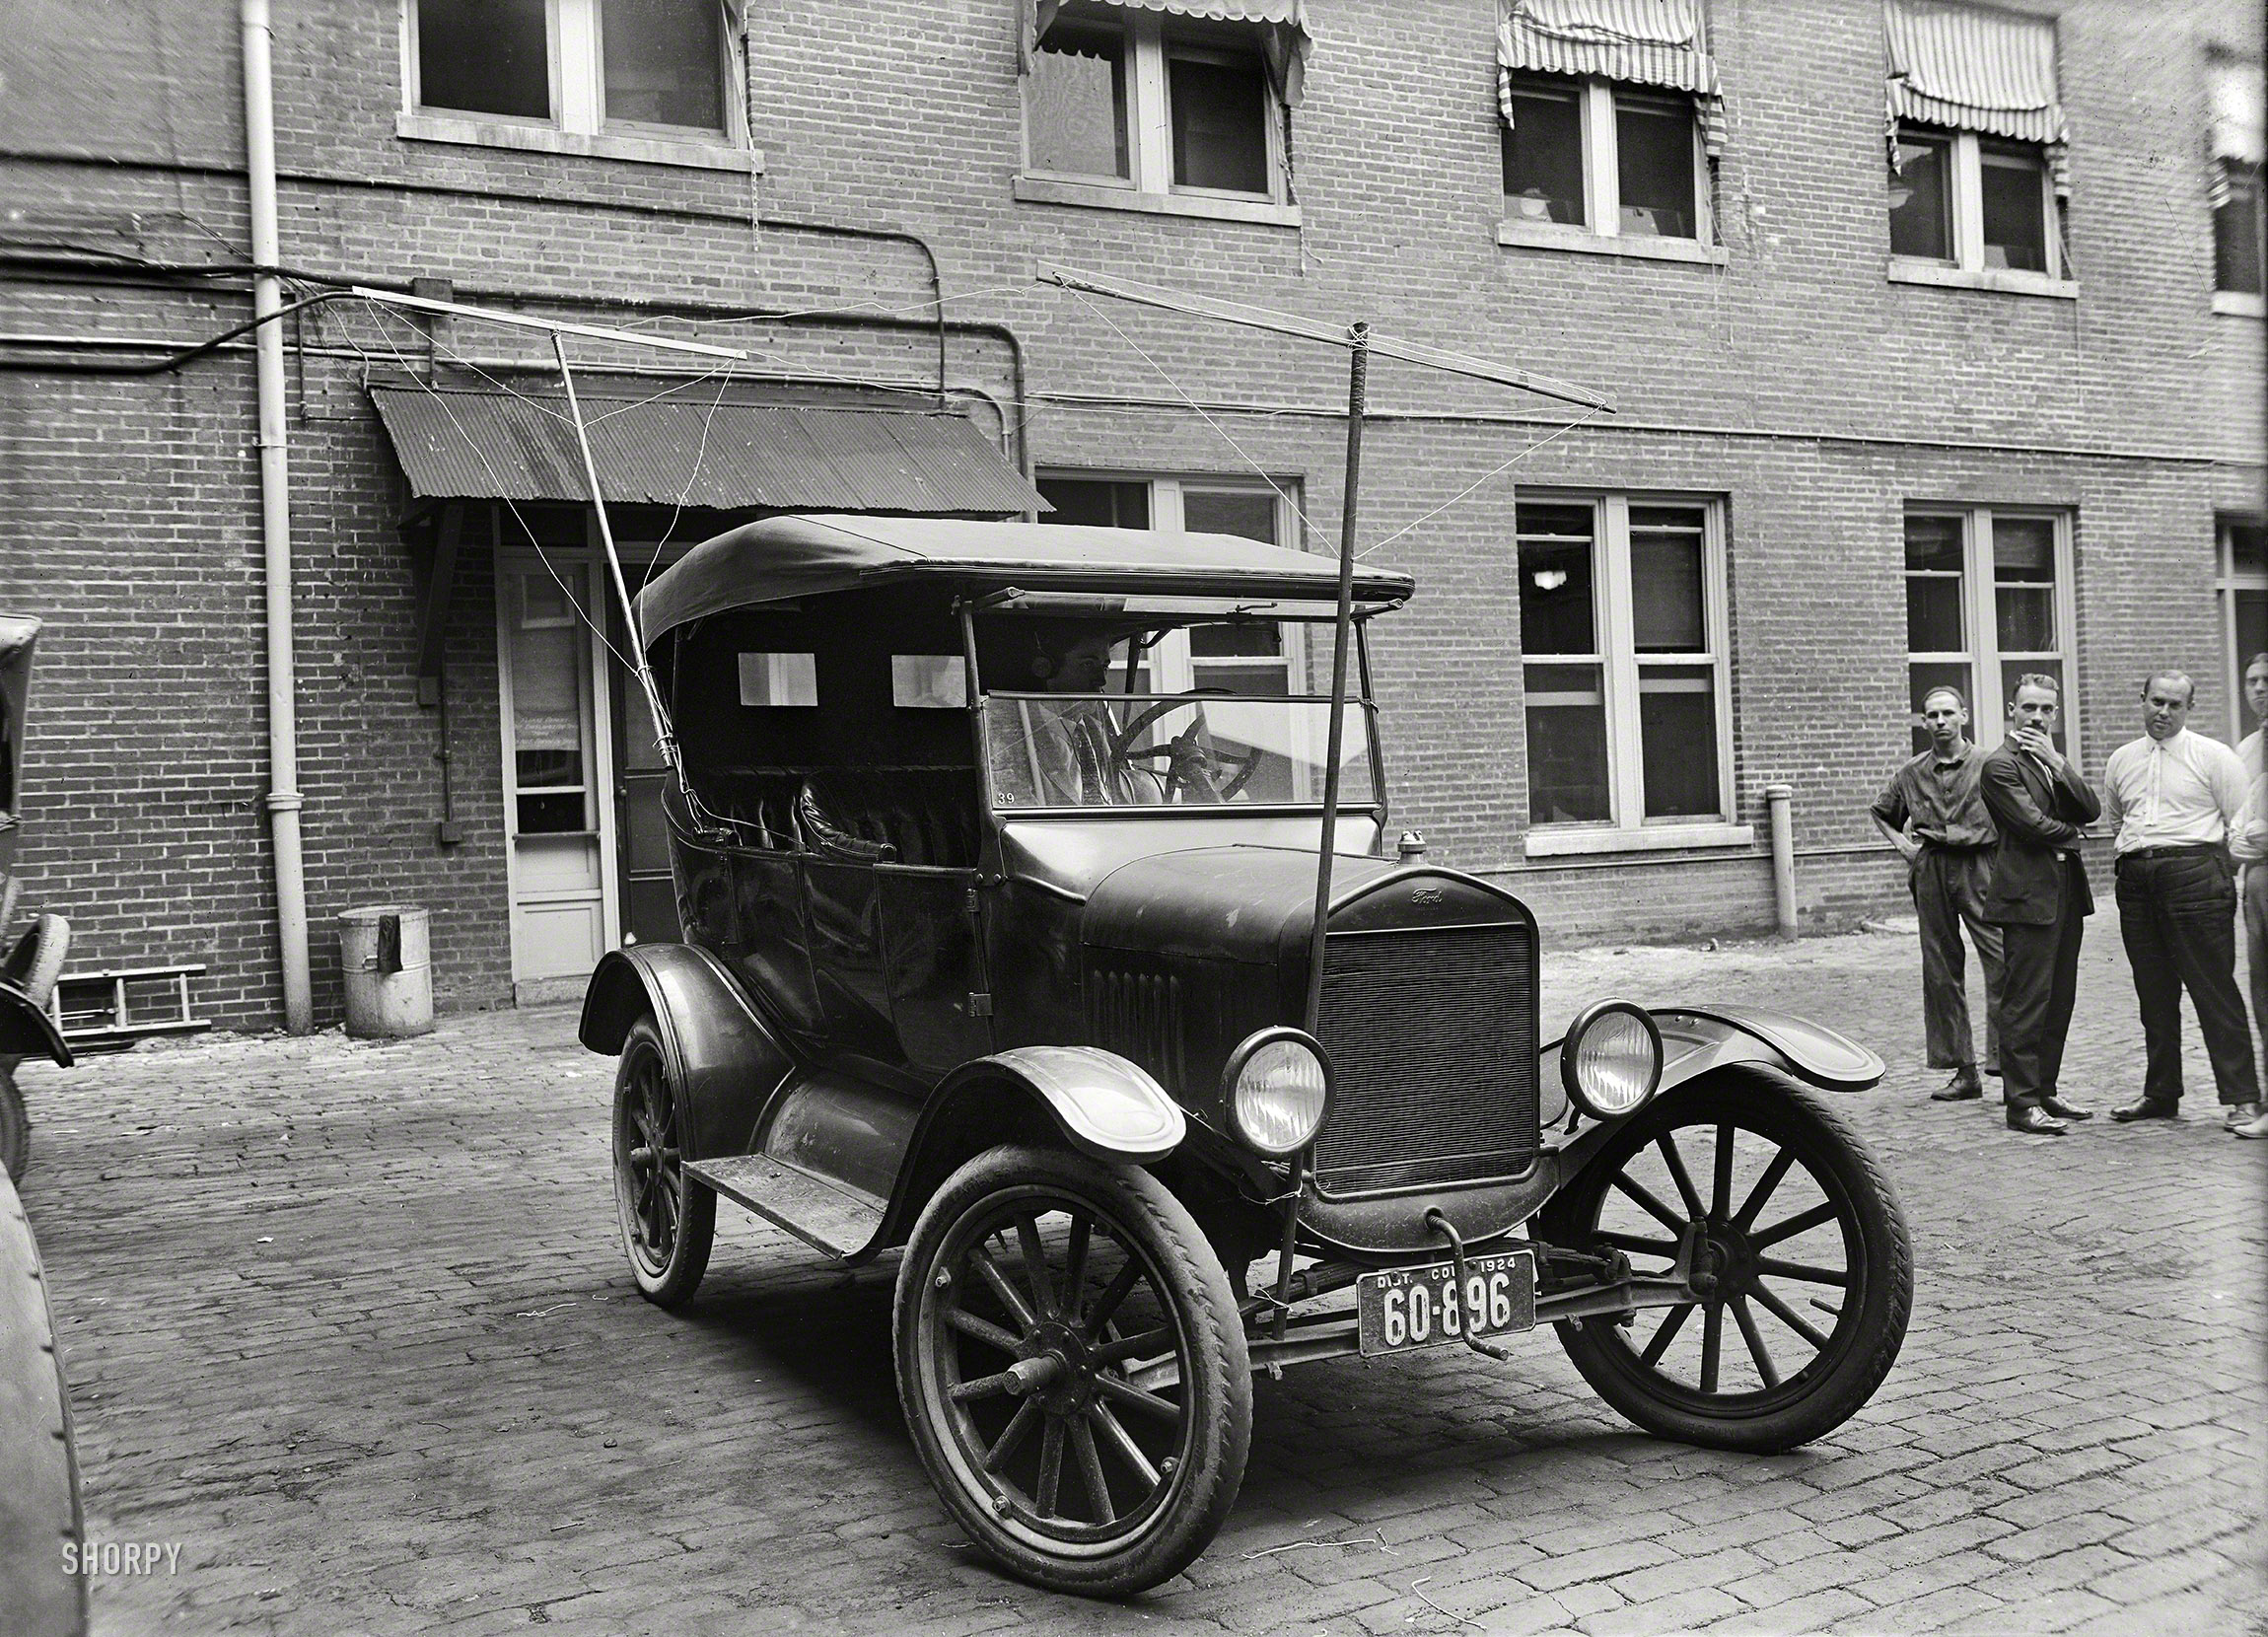 1924. Washington, D.C. "Auto equipped with radio (made for Potomac Electric Power Co.)" Harris & Ewing Collection glass negative. View full size.